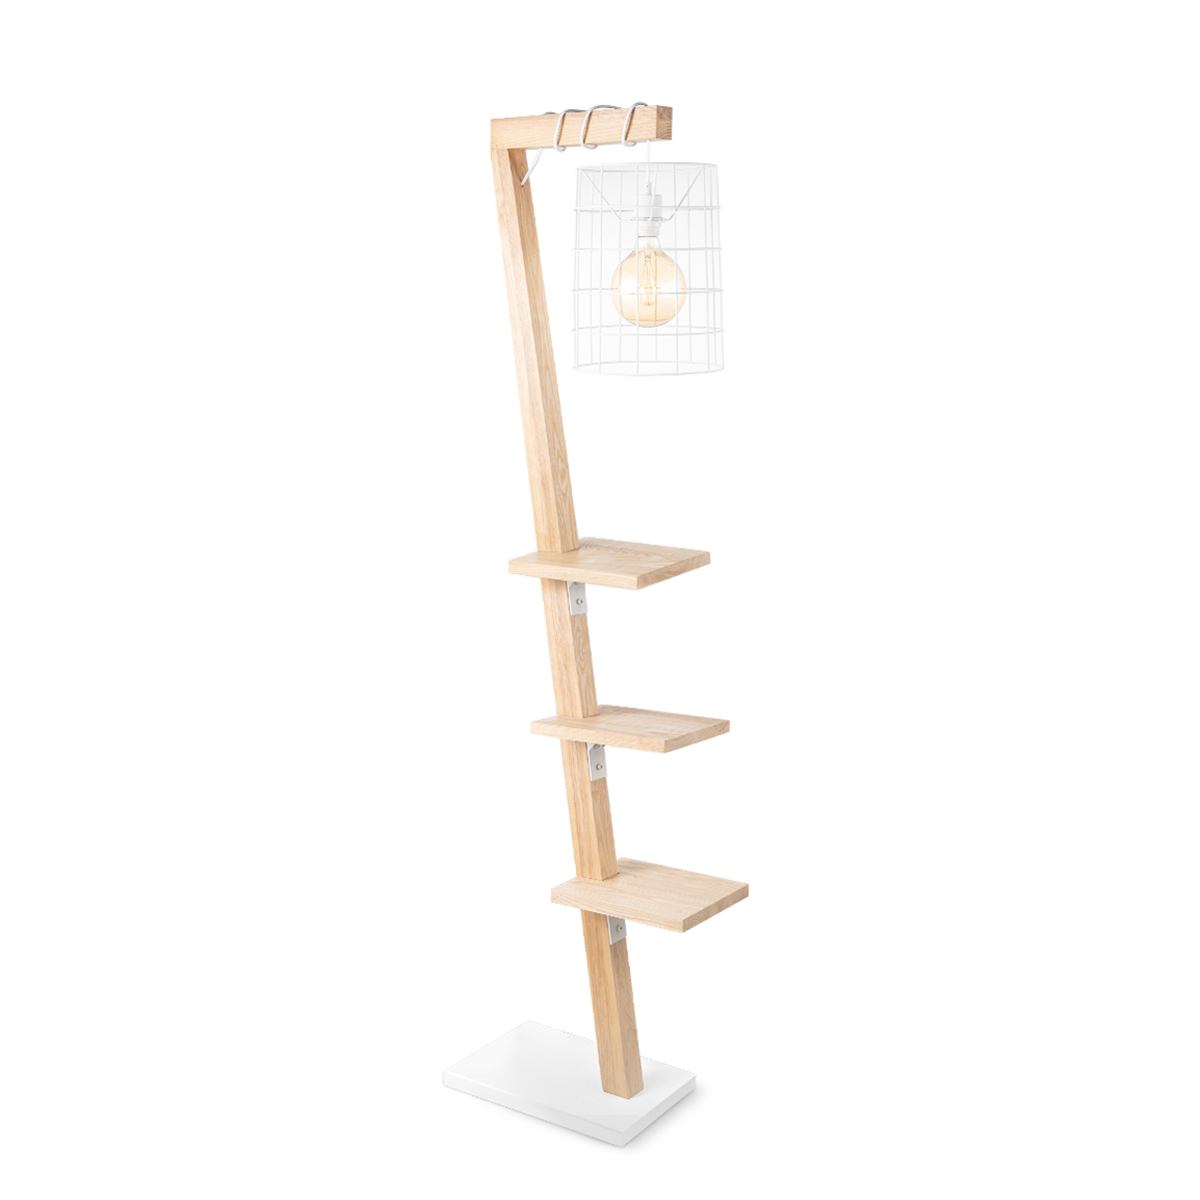 Tangla lighting - TLF2033-01SW - LED floor lamp 1 Light - metal and wood in natural and sand white - ladder - E27